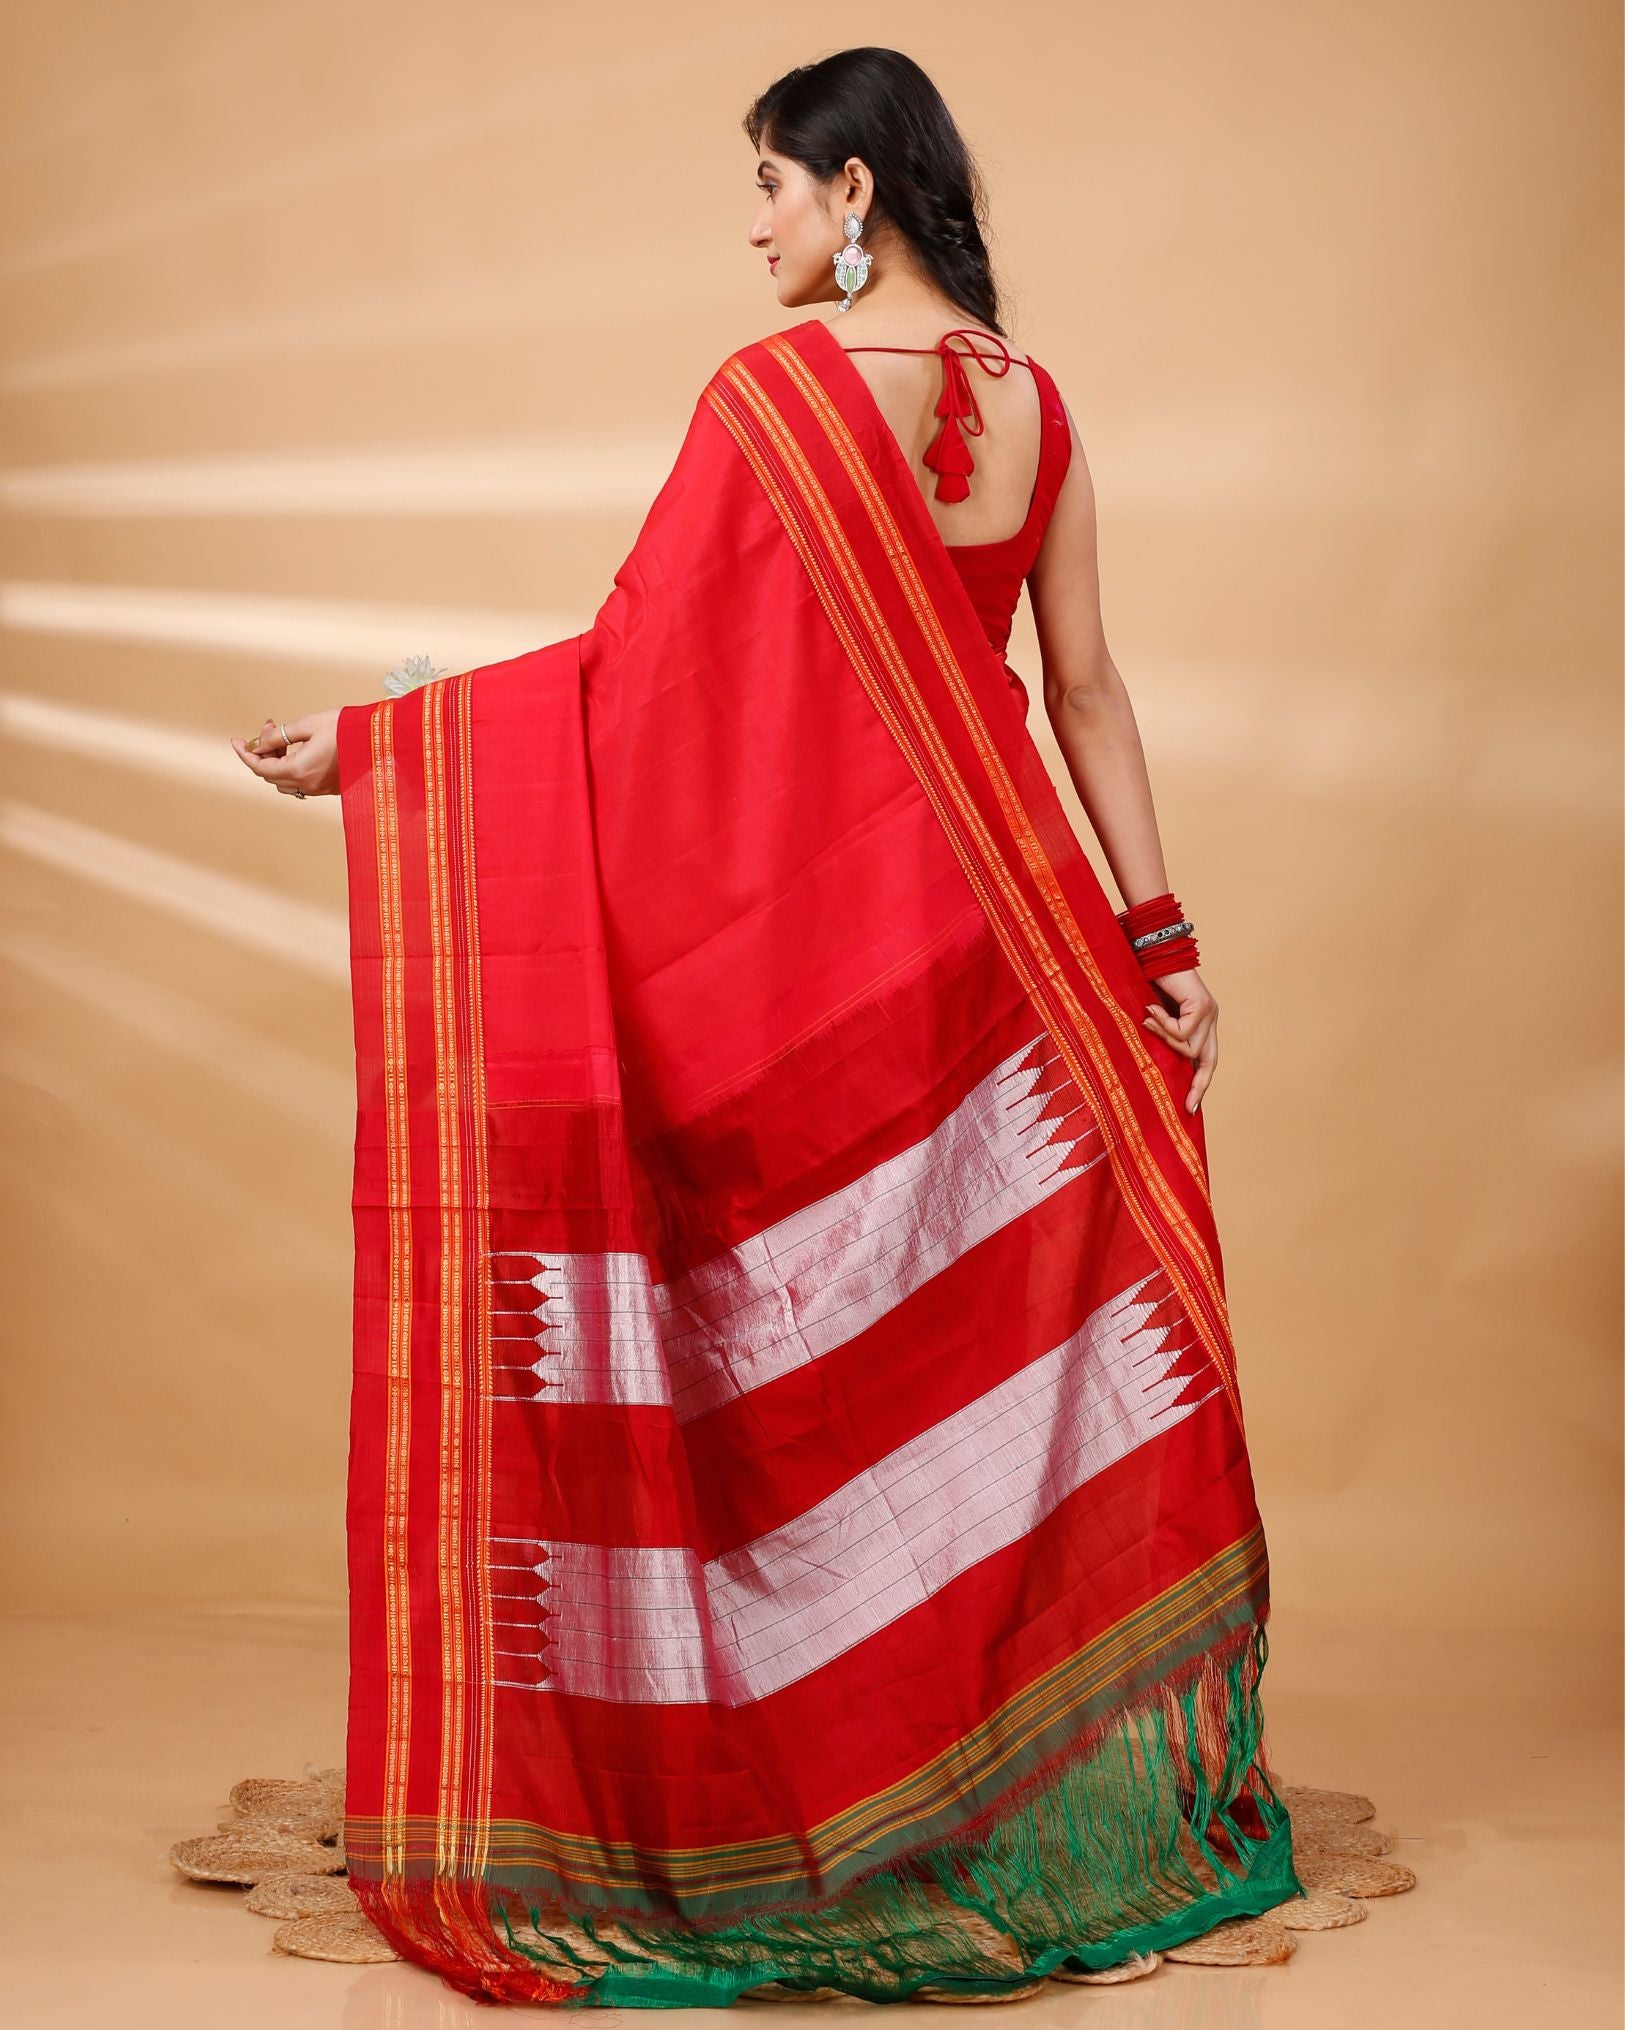 ILKAL Handloom Cotton Silk Saree Red Color with running blouse - IndieHaat